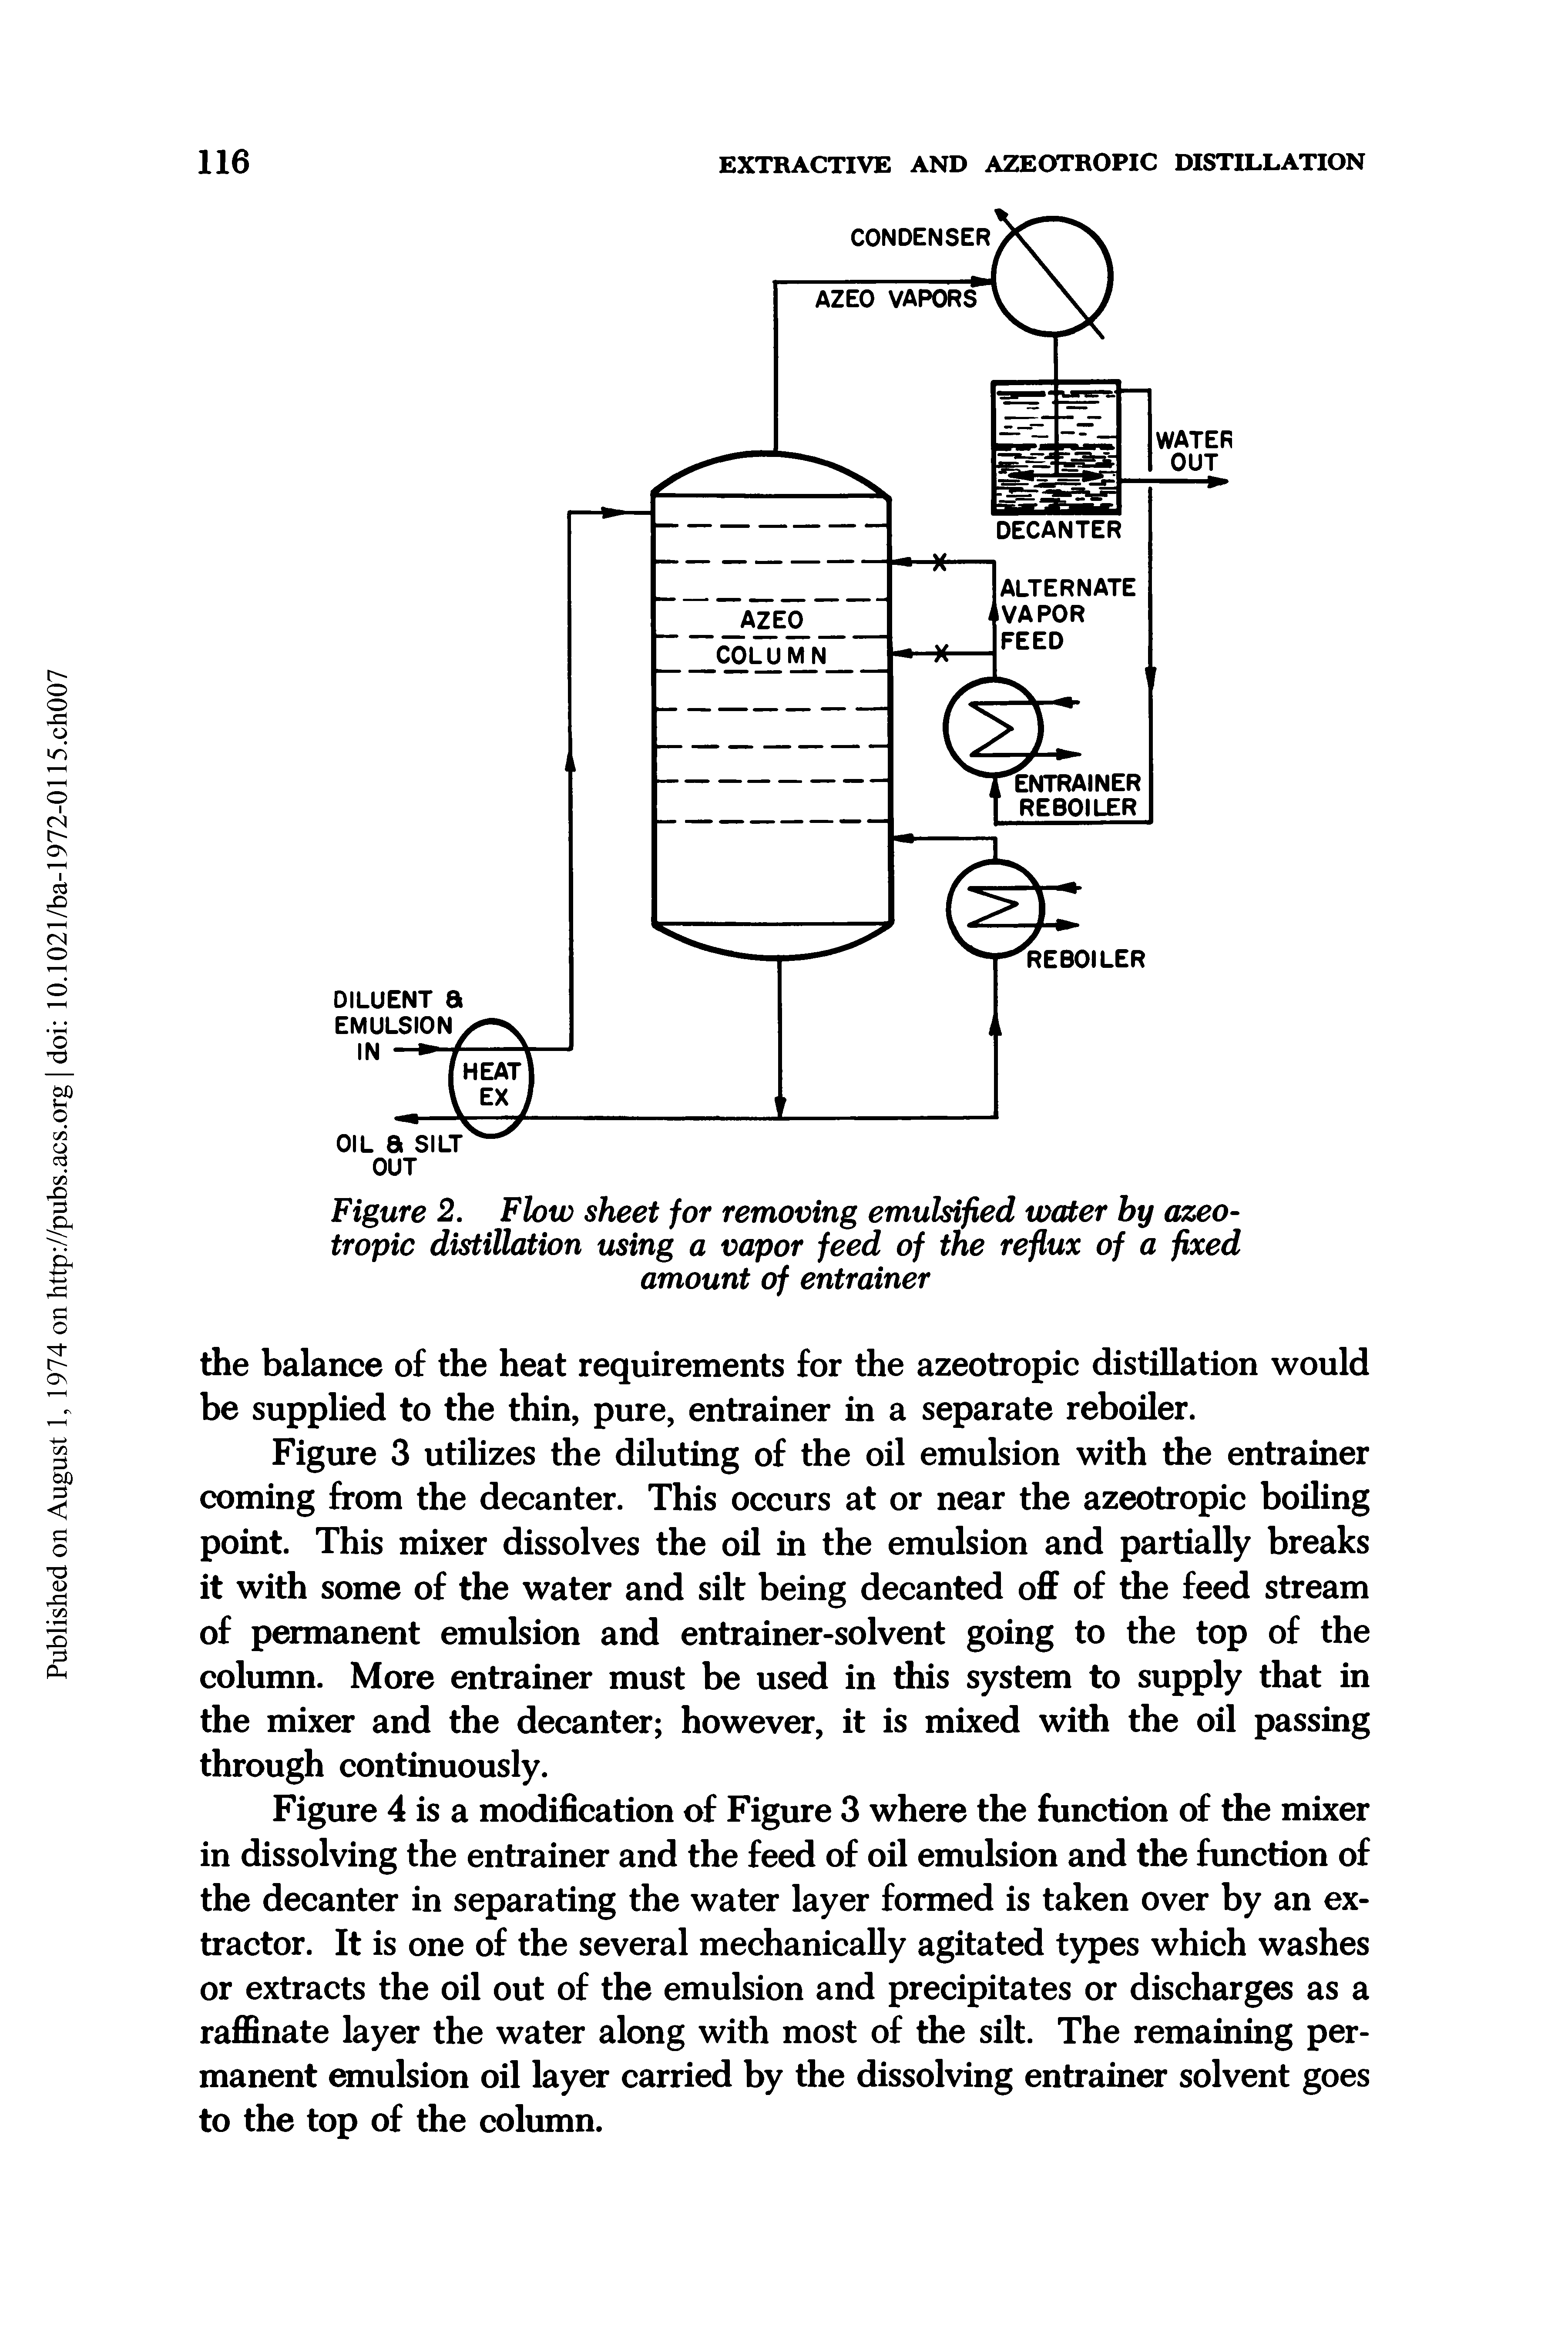 Figure 2. Flow sheet for removing emulsified water by azeotropic distillation using a vapor feed of the reflux of a fixed amount of entrainer...